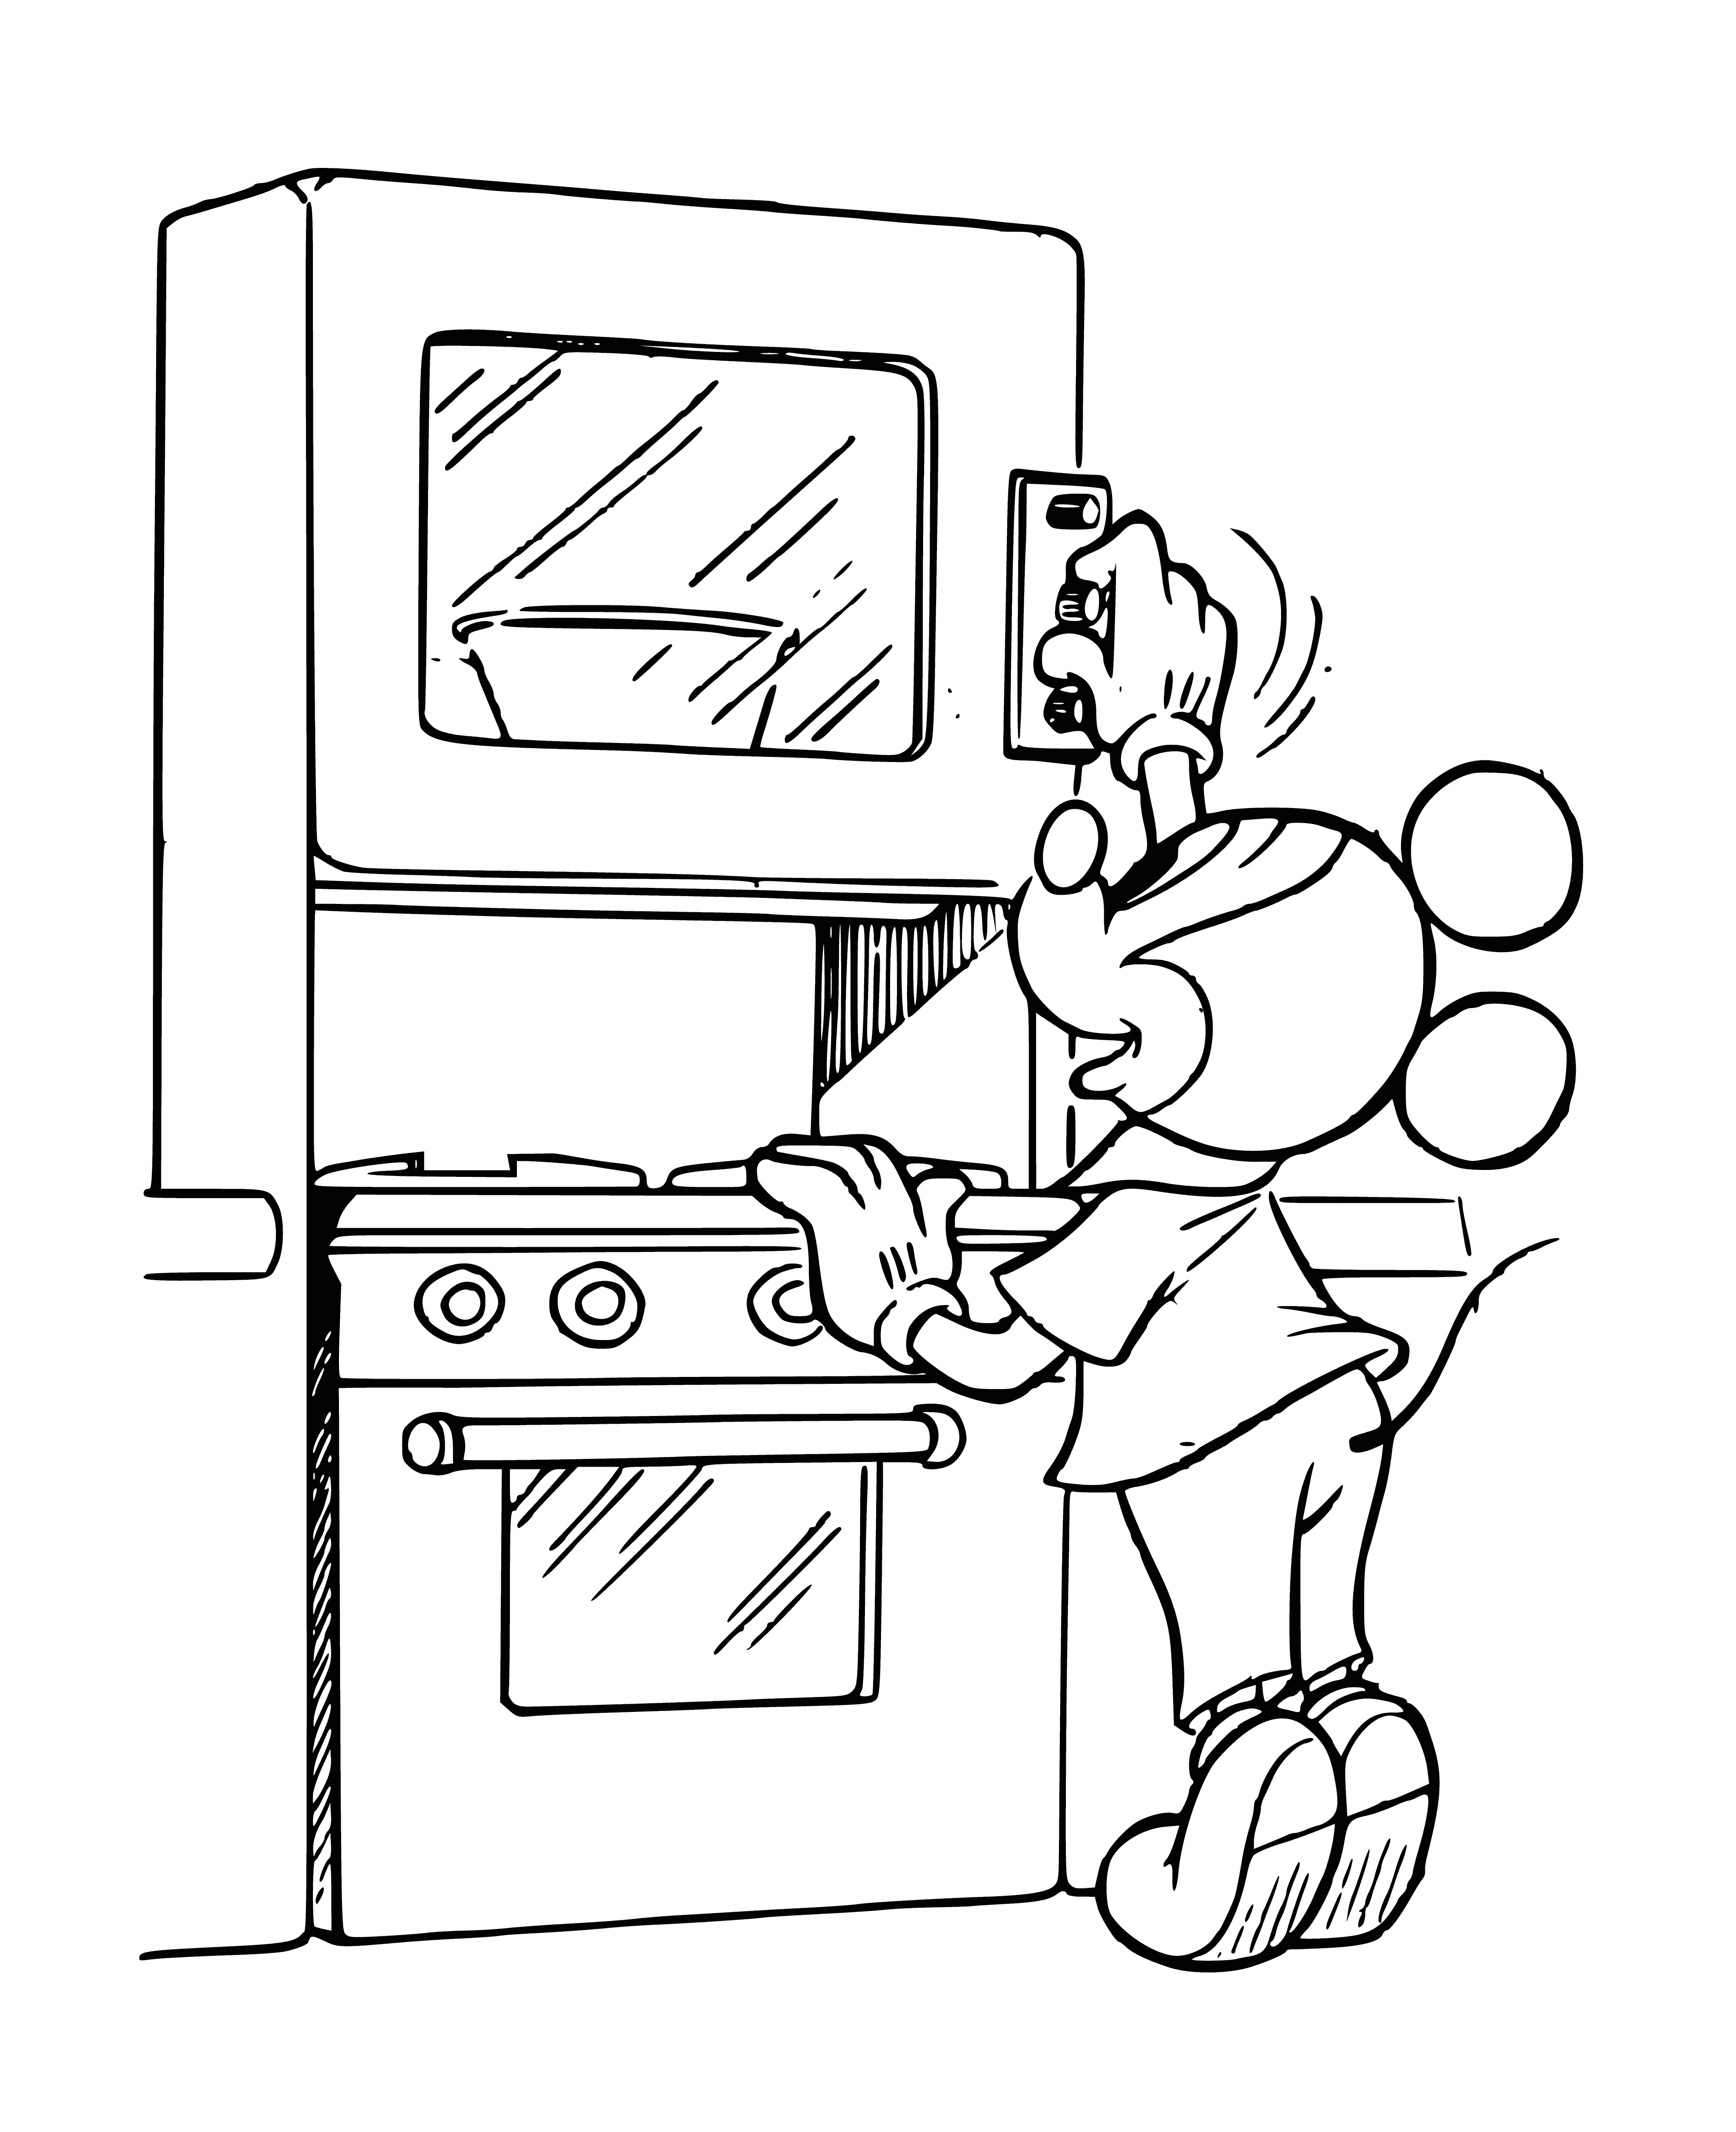 coloring page: Red Mickey Mouse & Co. microwave w/ white door & Mickey Mouse handle. White Mickey & Co. logo on front & white interior.